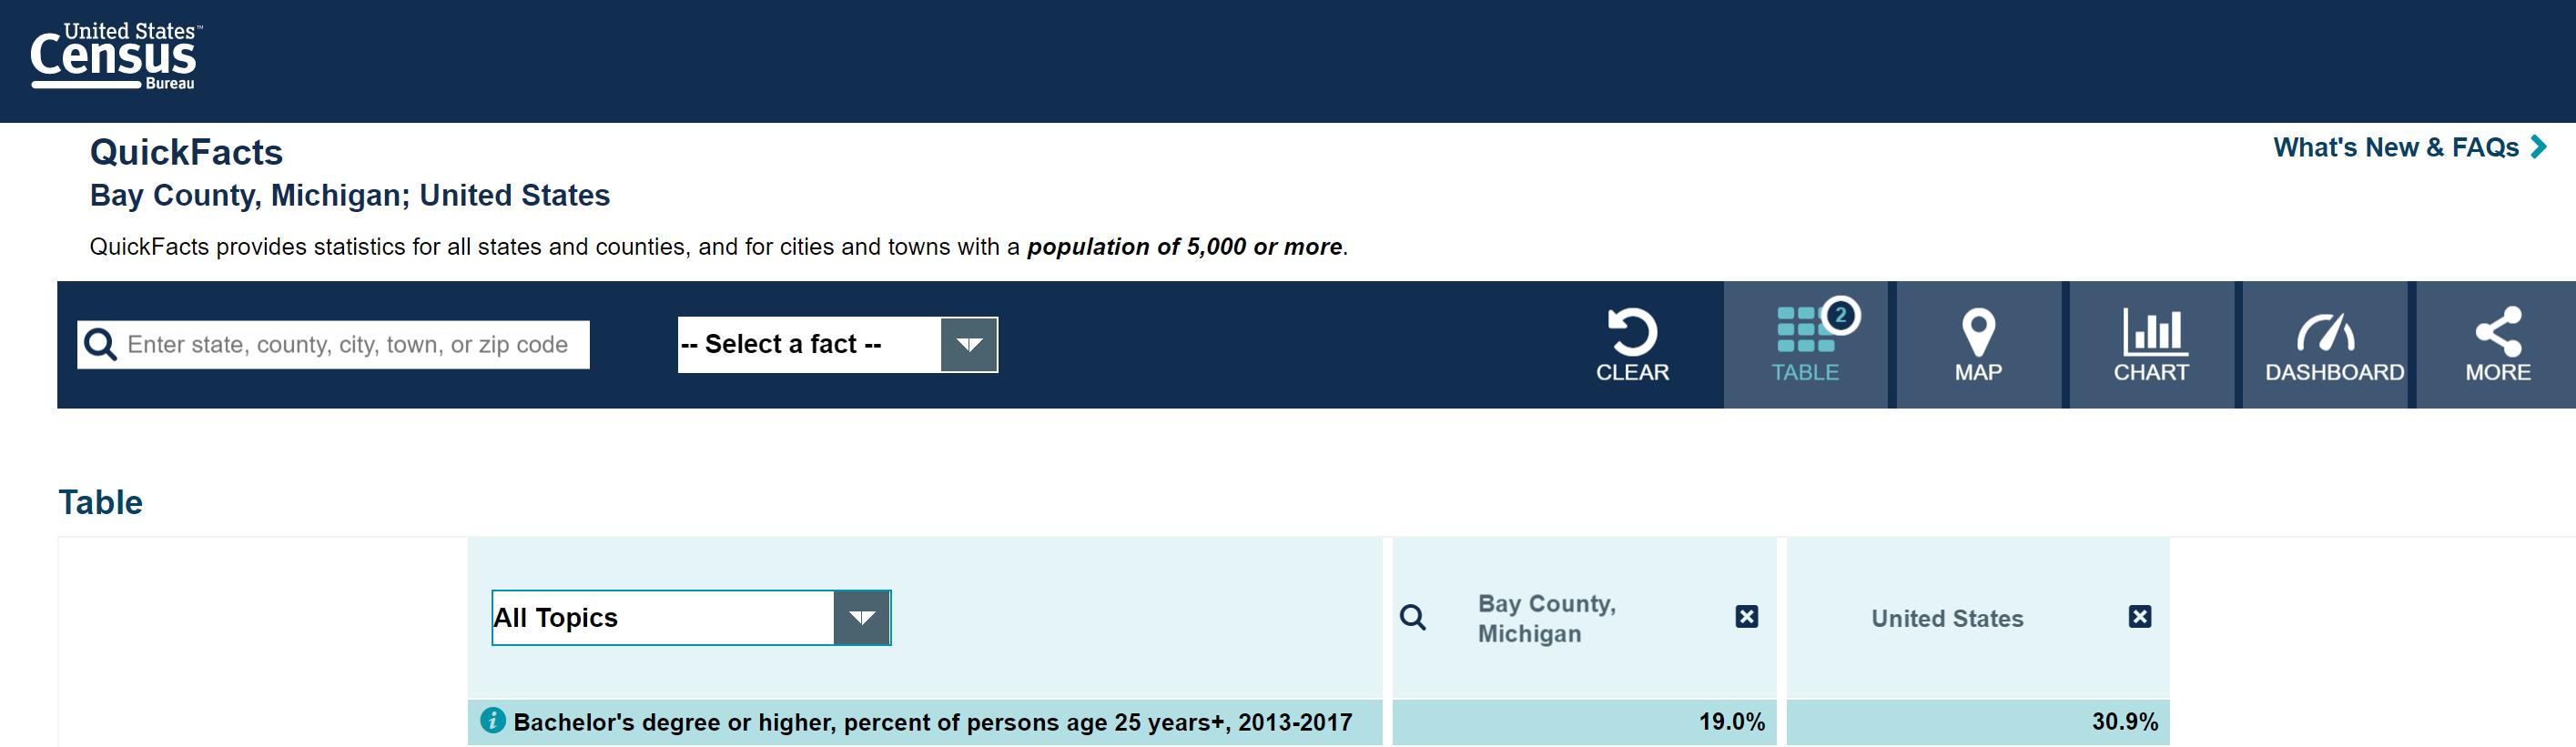 Screenshot similar to the image above except that the default table changes into a table showing only the variable “Bachelor’s degree or higher, percent of persons age 25 years+, 2013-2017” for Bay County and the United States.